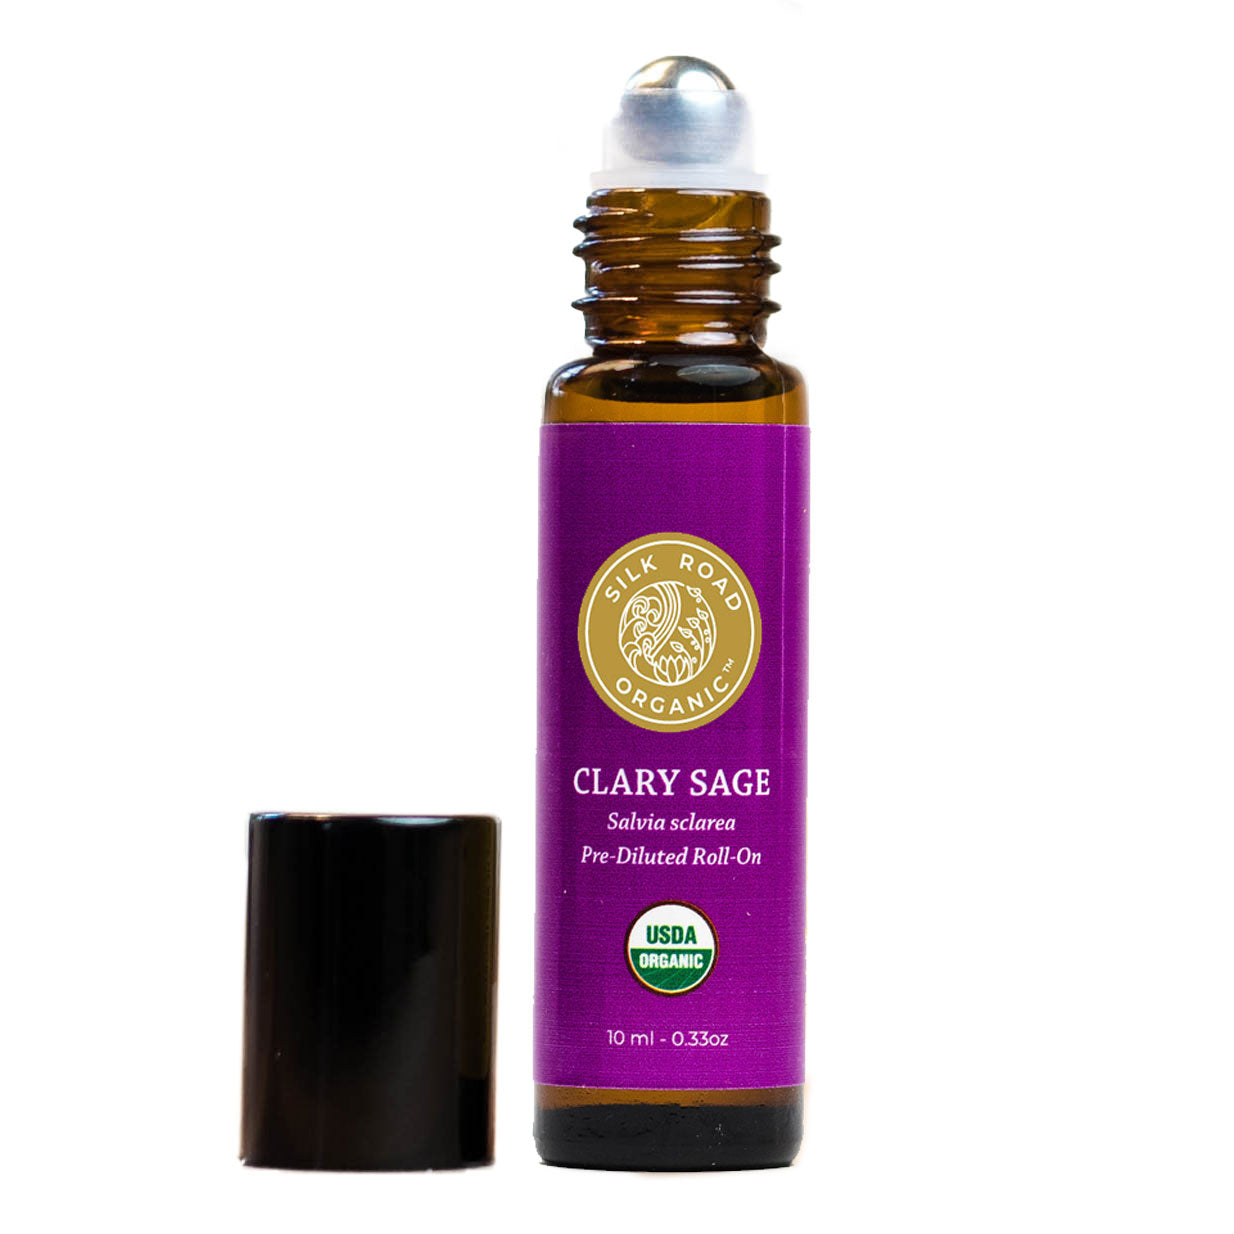 clary sage salvia sclarea essential oil combined carrier fractionated coconut silk road organic